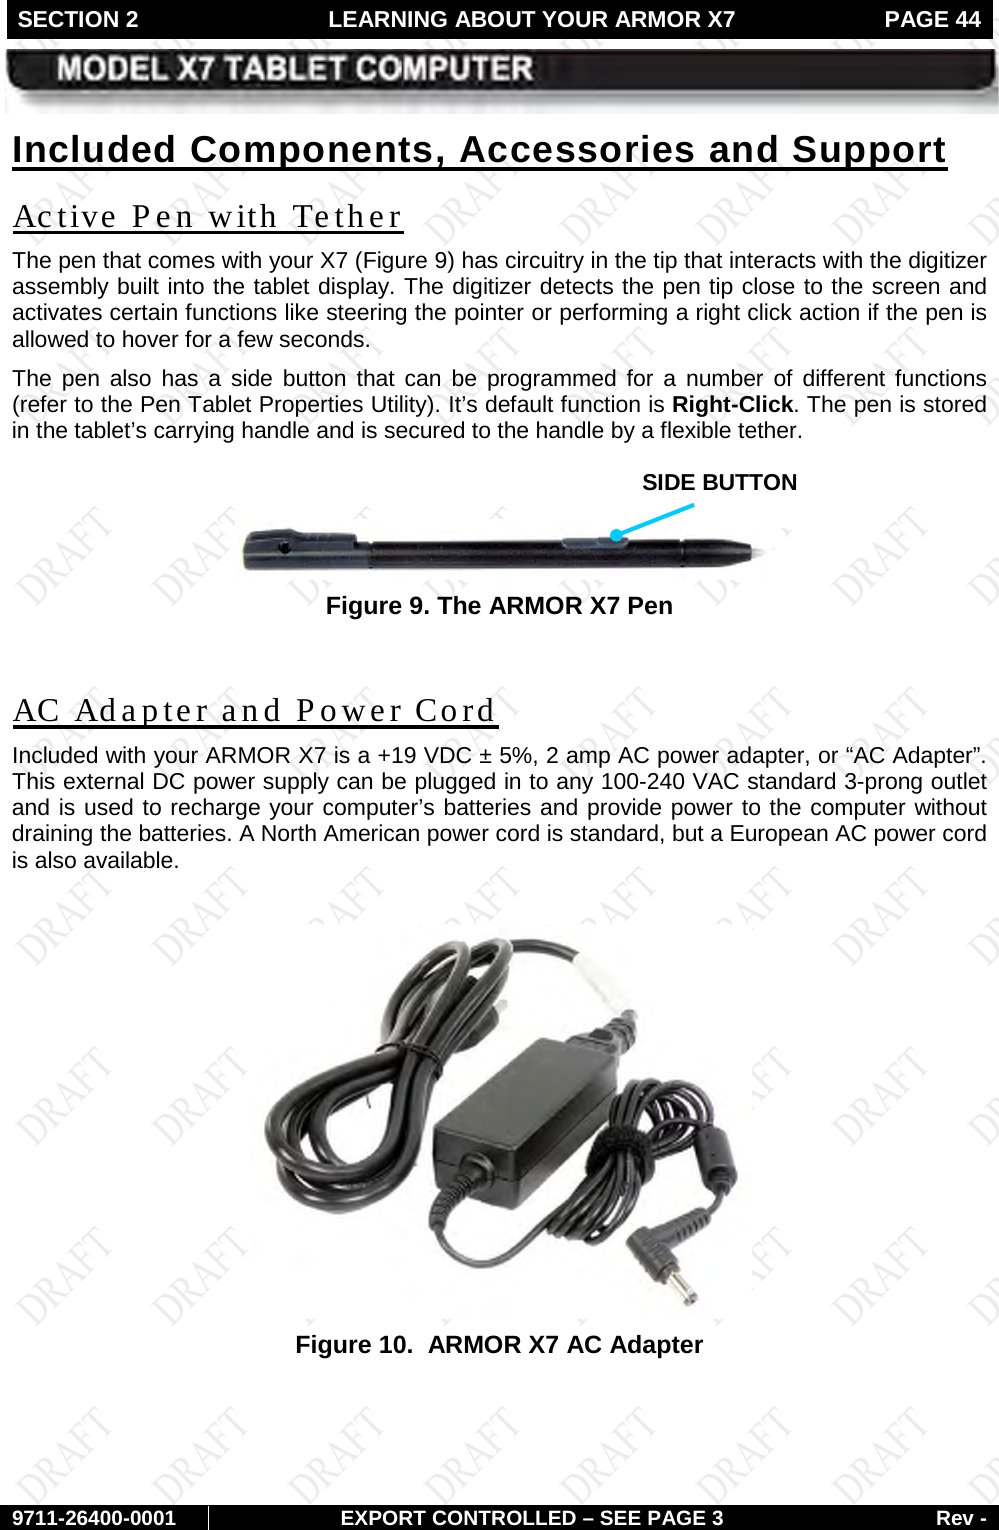 SECTION 2 LEARNING ABOUT YOUR ARMOR X7  PAGE 44        9711-26400-0001 EXPORT CONTROLLED – SEE PAGE 3 Rev - Included Components, Accessories and Support The pen that comes with your X7 (Active Pen with Tether Figure 9) has circuitry in the tip that interacts with the digitizer assembly built into the tablet display. The digitizer detects the pen tip close to the screen and activates certain functions like steering the pointer or performing a right click action if the pen is allowed to hover for a few seconds.  The pen also has a side button that can be programmed for a number of different functions (refer to the Pen Tablet Properties Utility). It’s default function is Right-Click. The pen is stored in the tablet’s carrying handle and is secured to the handle by a flexible tether.   Figure 9. The ARMOR X7 Pen  Included with your ARMOR X7 is a +19 VDC ± 5%, 2 amp AC power adapter, or “AC Adapter”. This external DC power supply can be plugged in to any 100-240 VAC standard 3-prong outlet and is used to recharge your computer’s batteries and provide power to the computer without draining the batteries. A North American power cord is standard, but a European AC power cord is also available. AC Adapter and Power Cord   Figure 10.  ARMOR X7 AC Adapter    SIDE BUTTON 